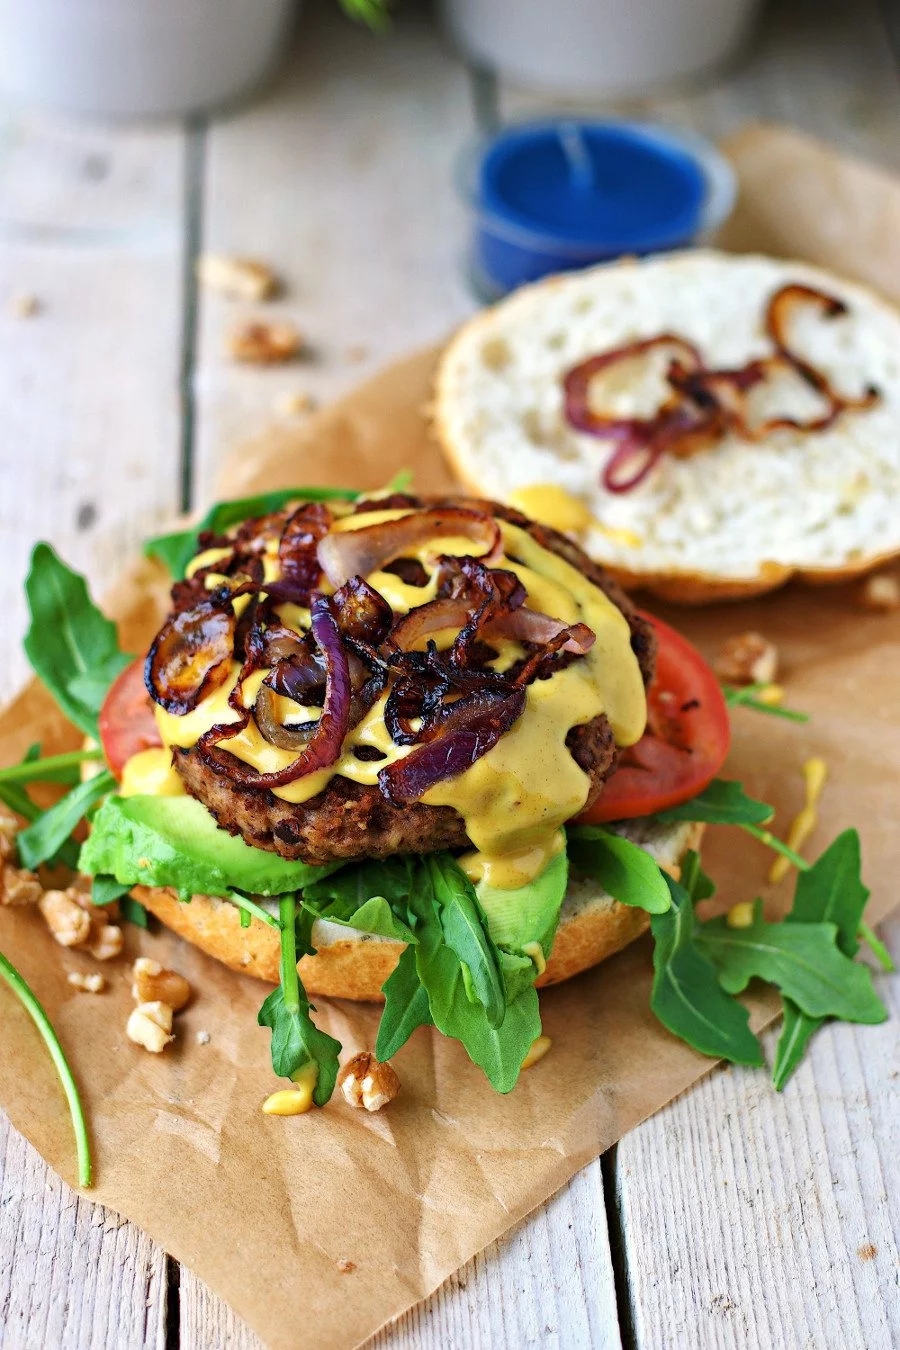 The Vegan Lentil Burger is topped with fried red onions.